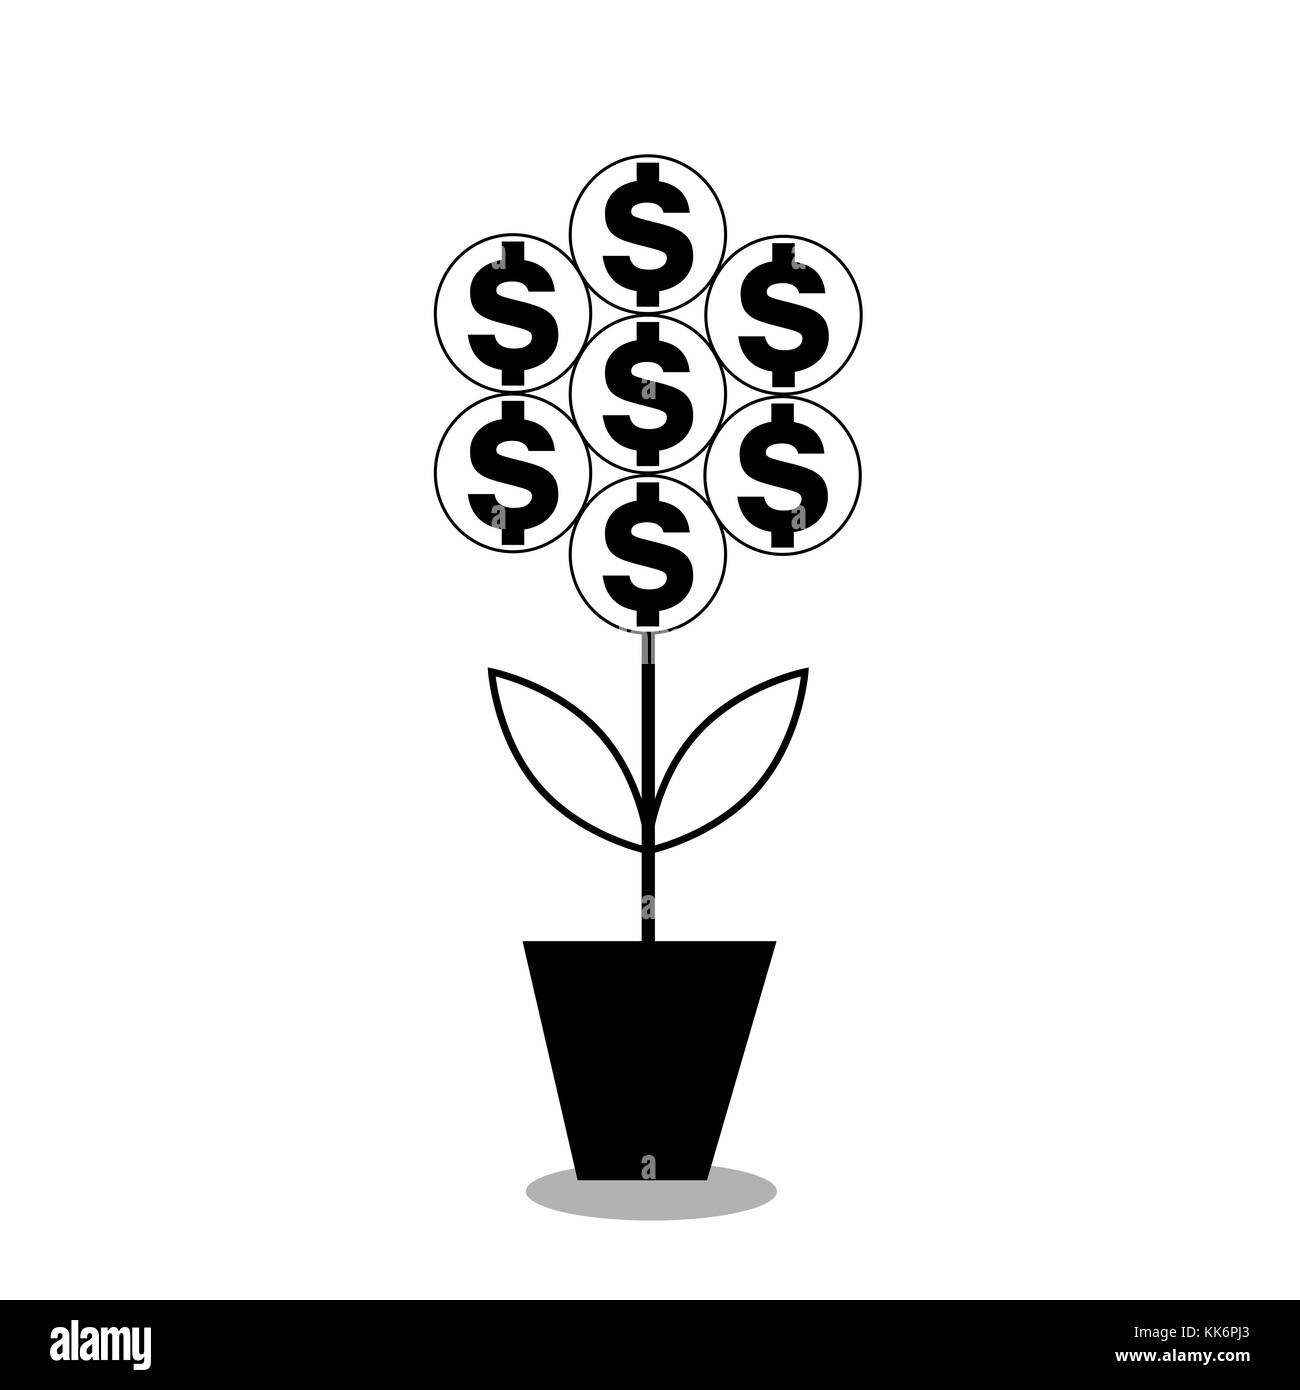 black icon of dollar flower in the pot. vector illustration, silhouette, clip art isolated on white background. Stock Photo